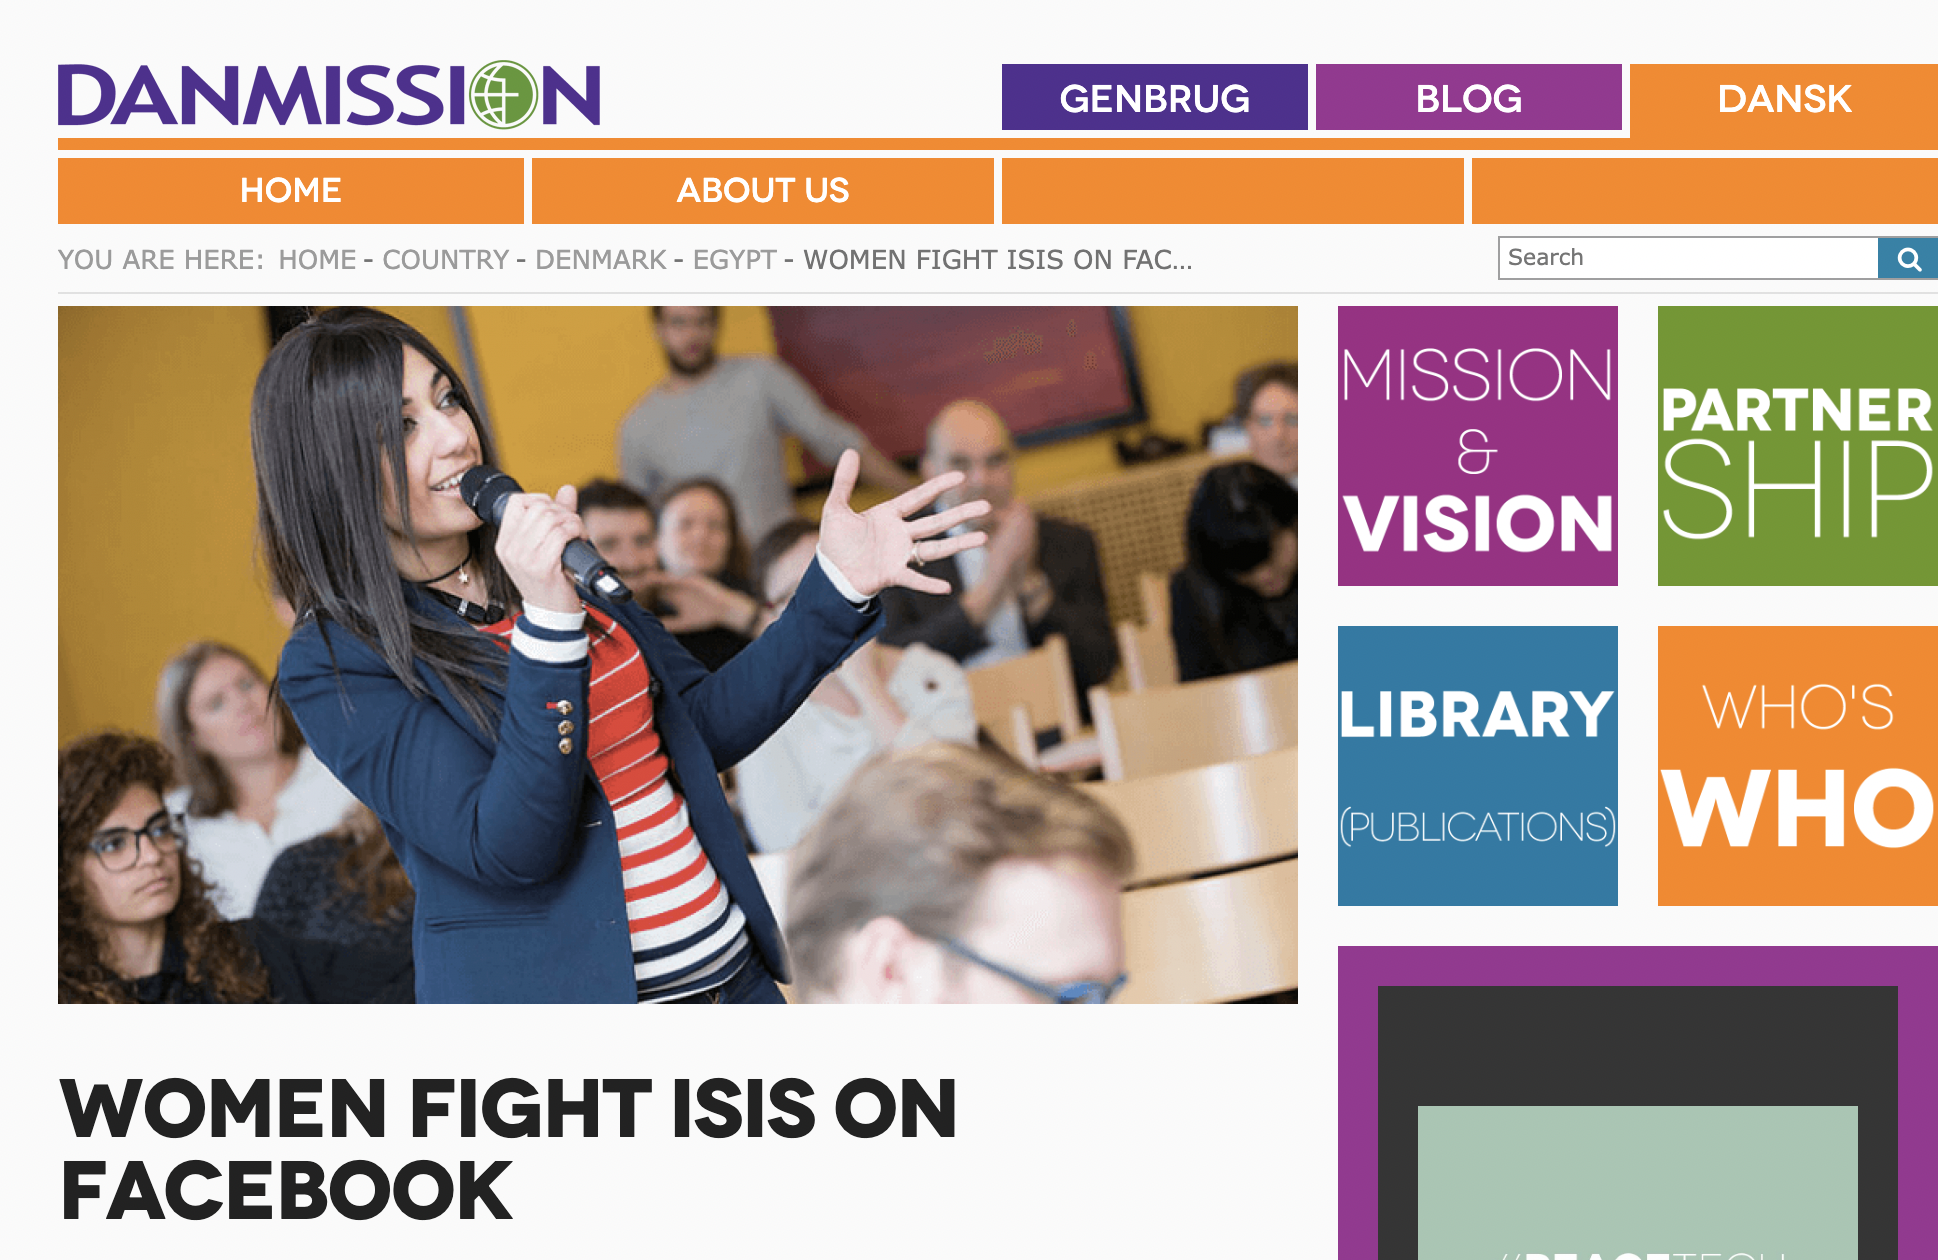 DANMISSION- Women fight ISIS on Facebook